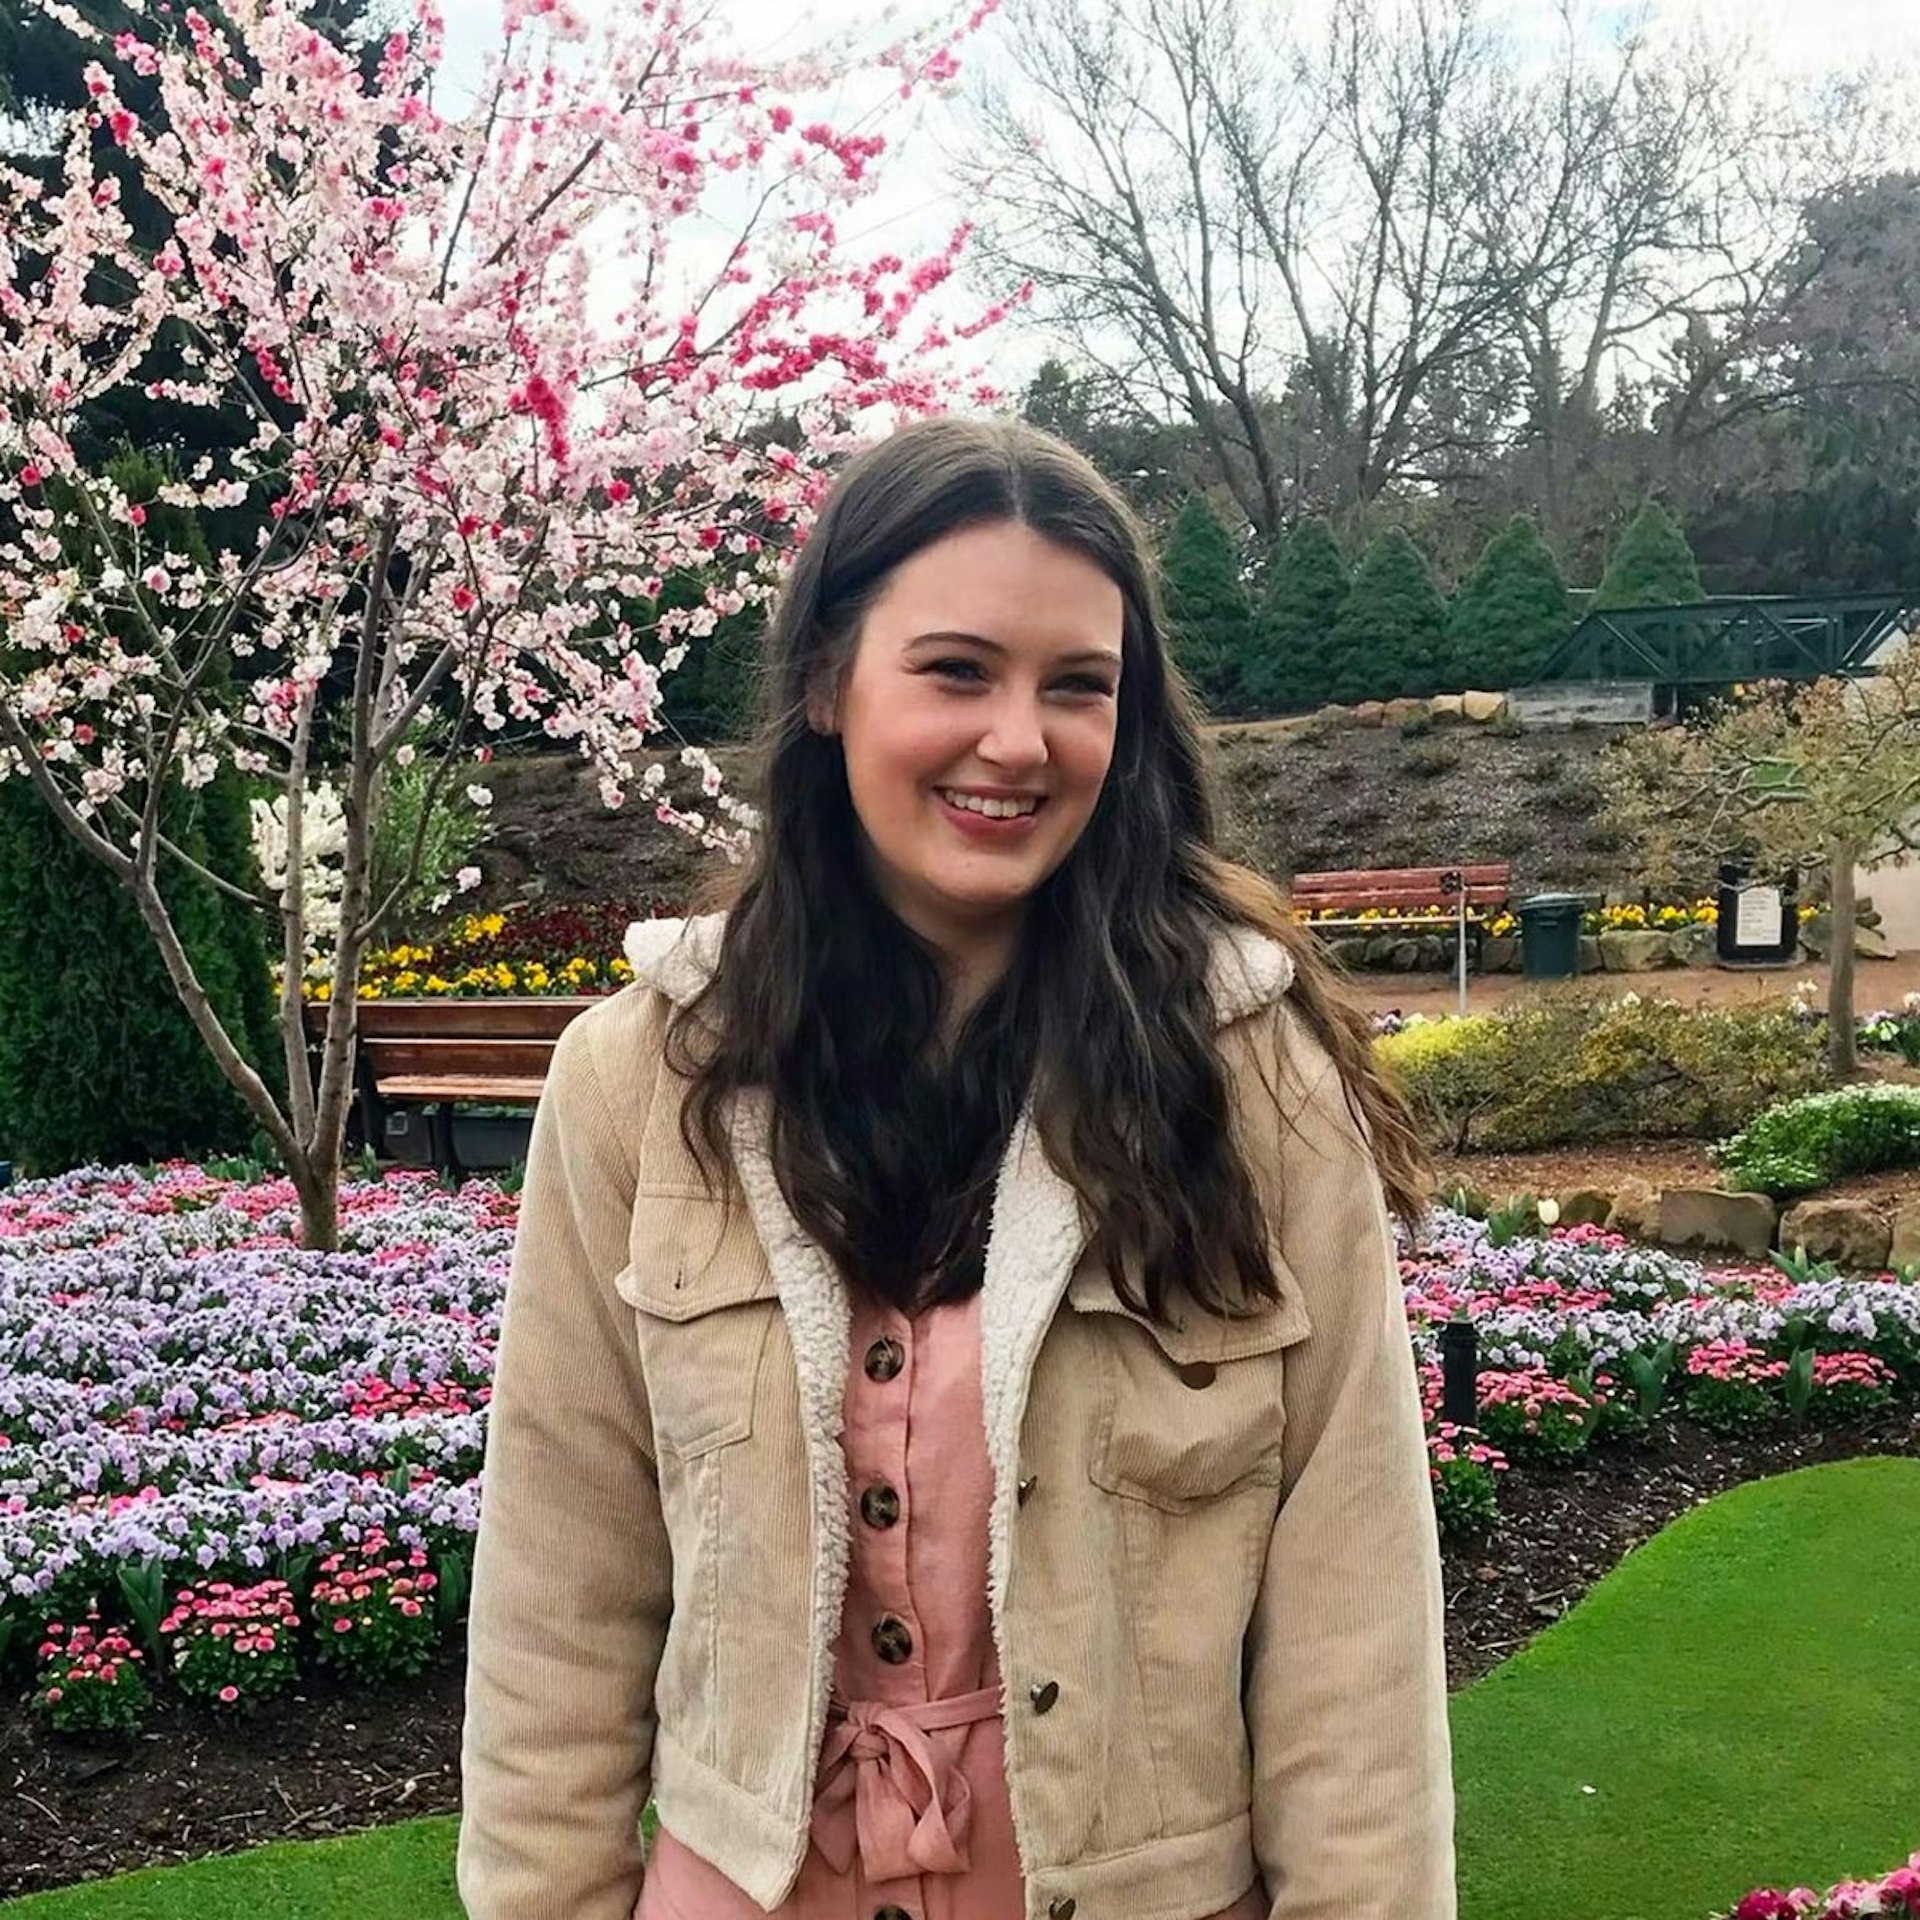 Alyssia is standing in a garden, in front of a Cherry Blossom tree, wearing a pink top and beige jacket and smiling directly into the camera. 